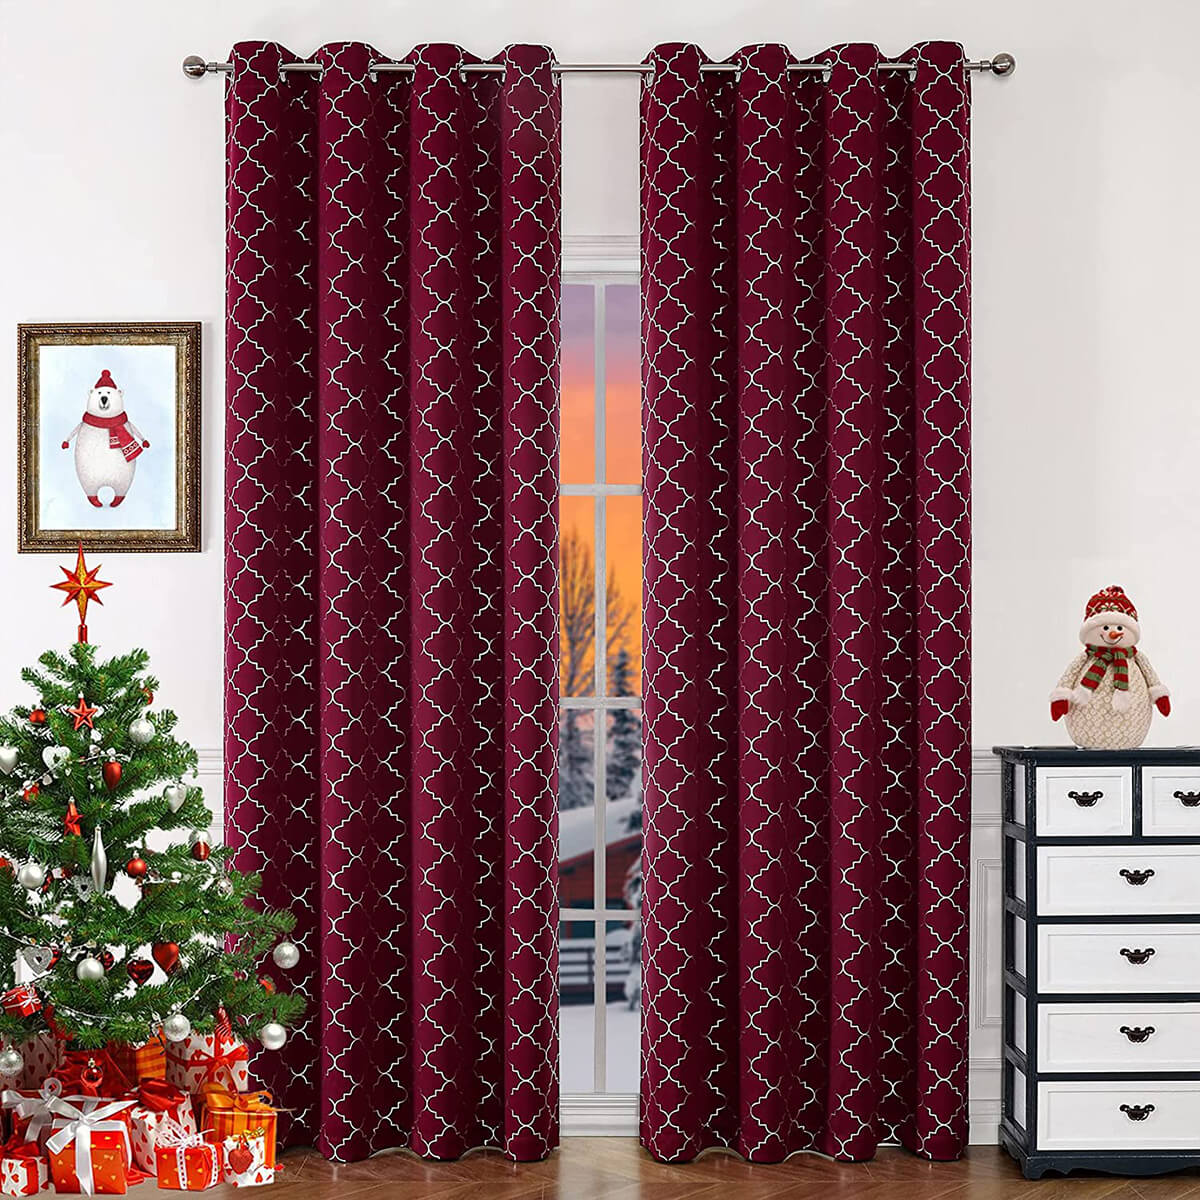 Moroccan Trellis Blackout Curtains with Metallic Accents